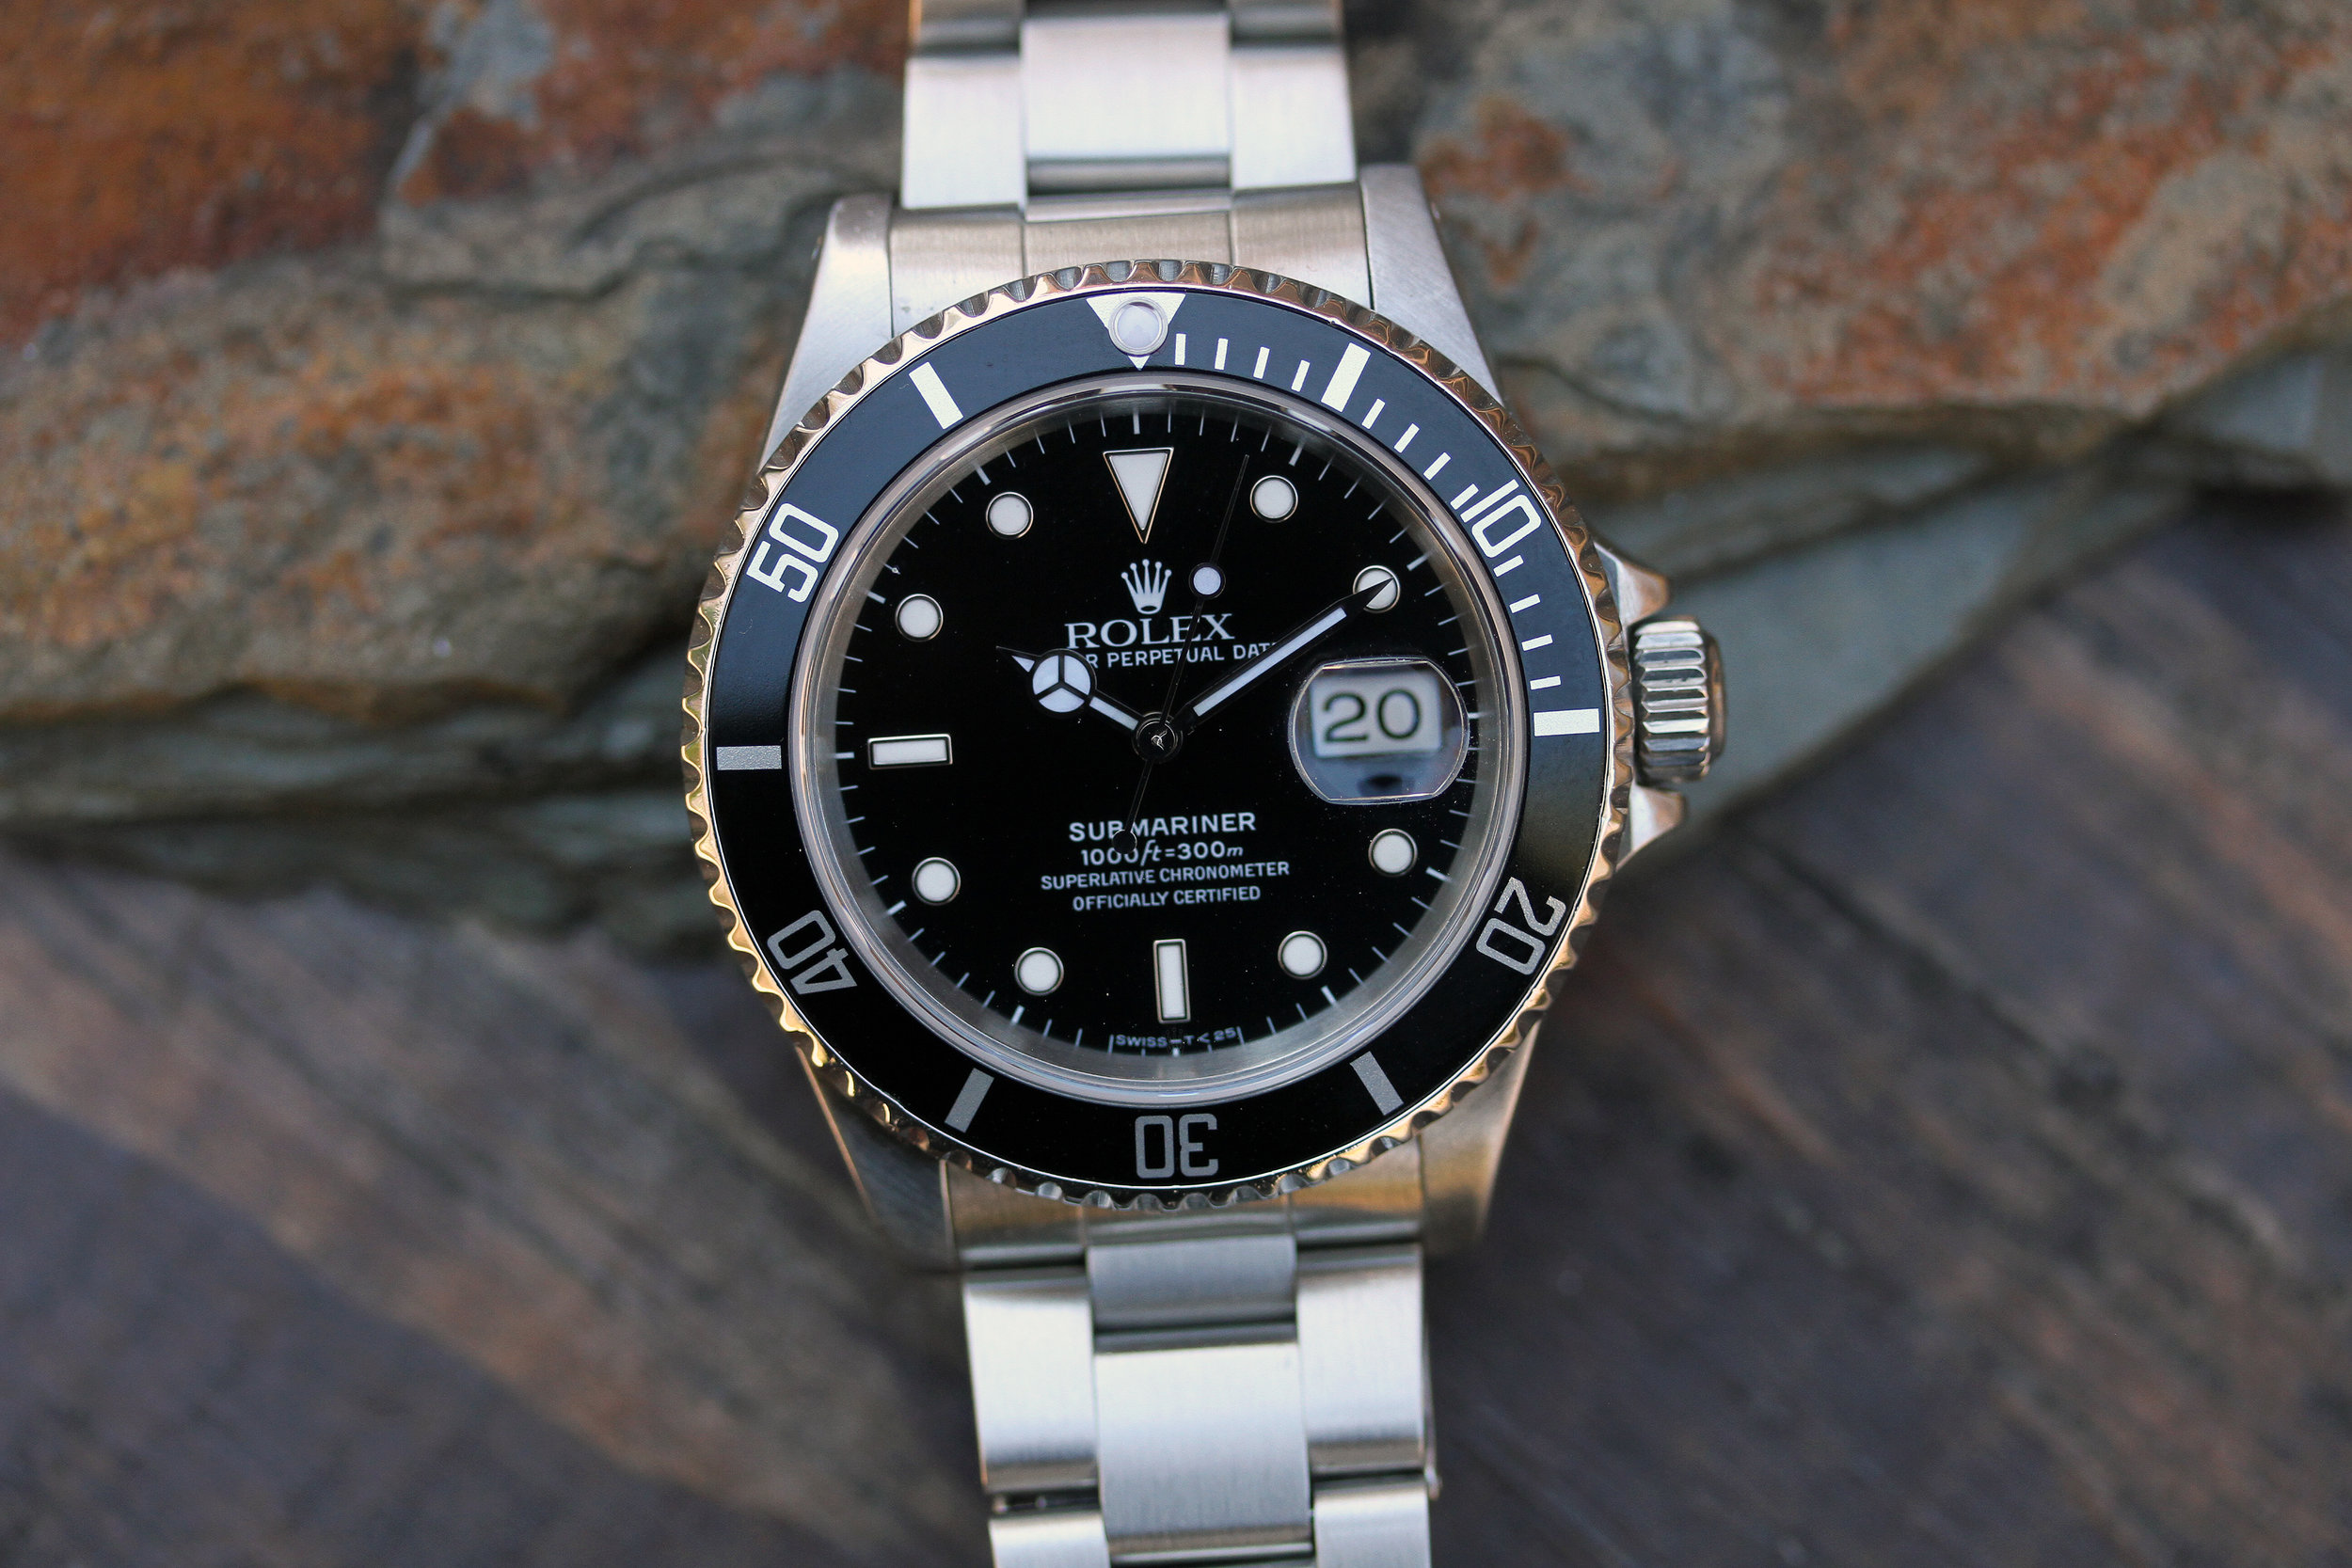 Rolex Submariner Date ref. 16610 "Tritium Dial, Box & Papers" - Lunar Oyster - and Selling